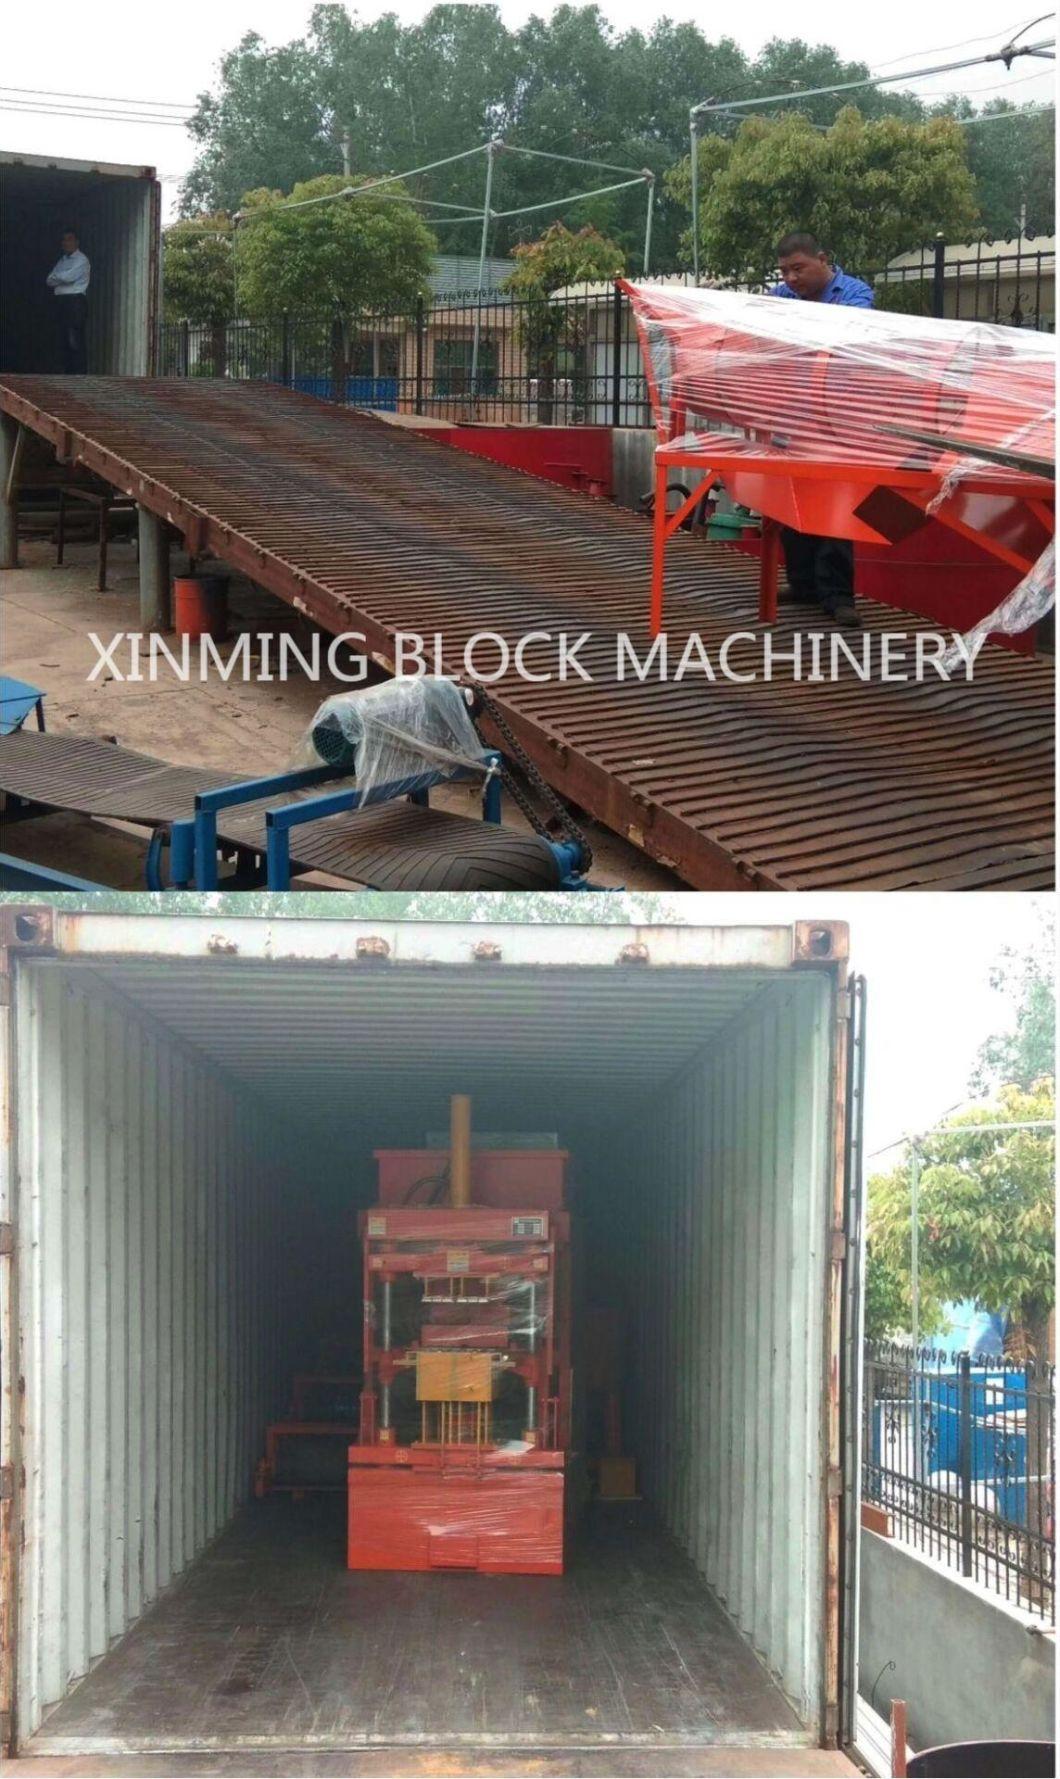 Xm 2-10 Brick Making Machine with PLC Intelligent Control System for Commercial Use Making Bricks, Stones